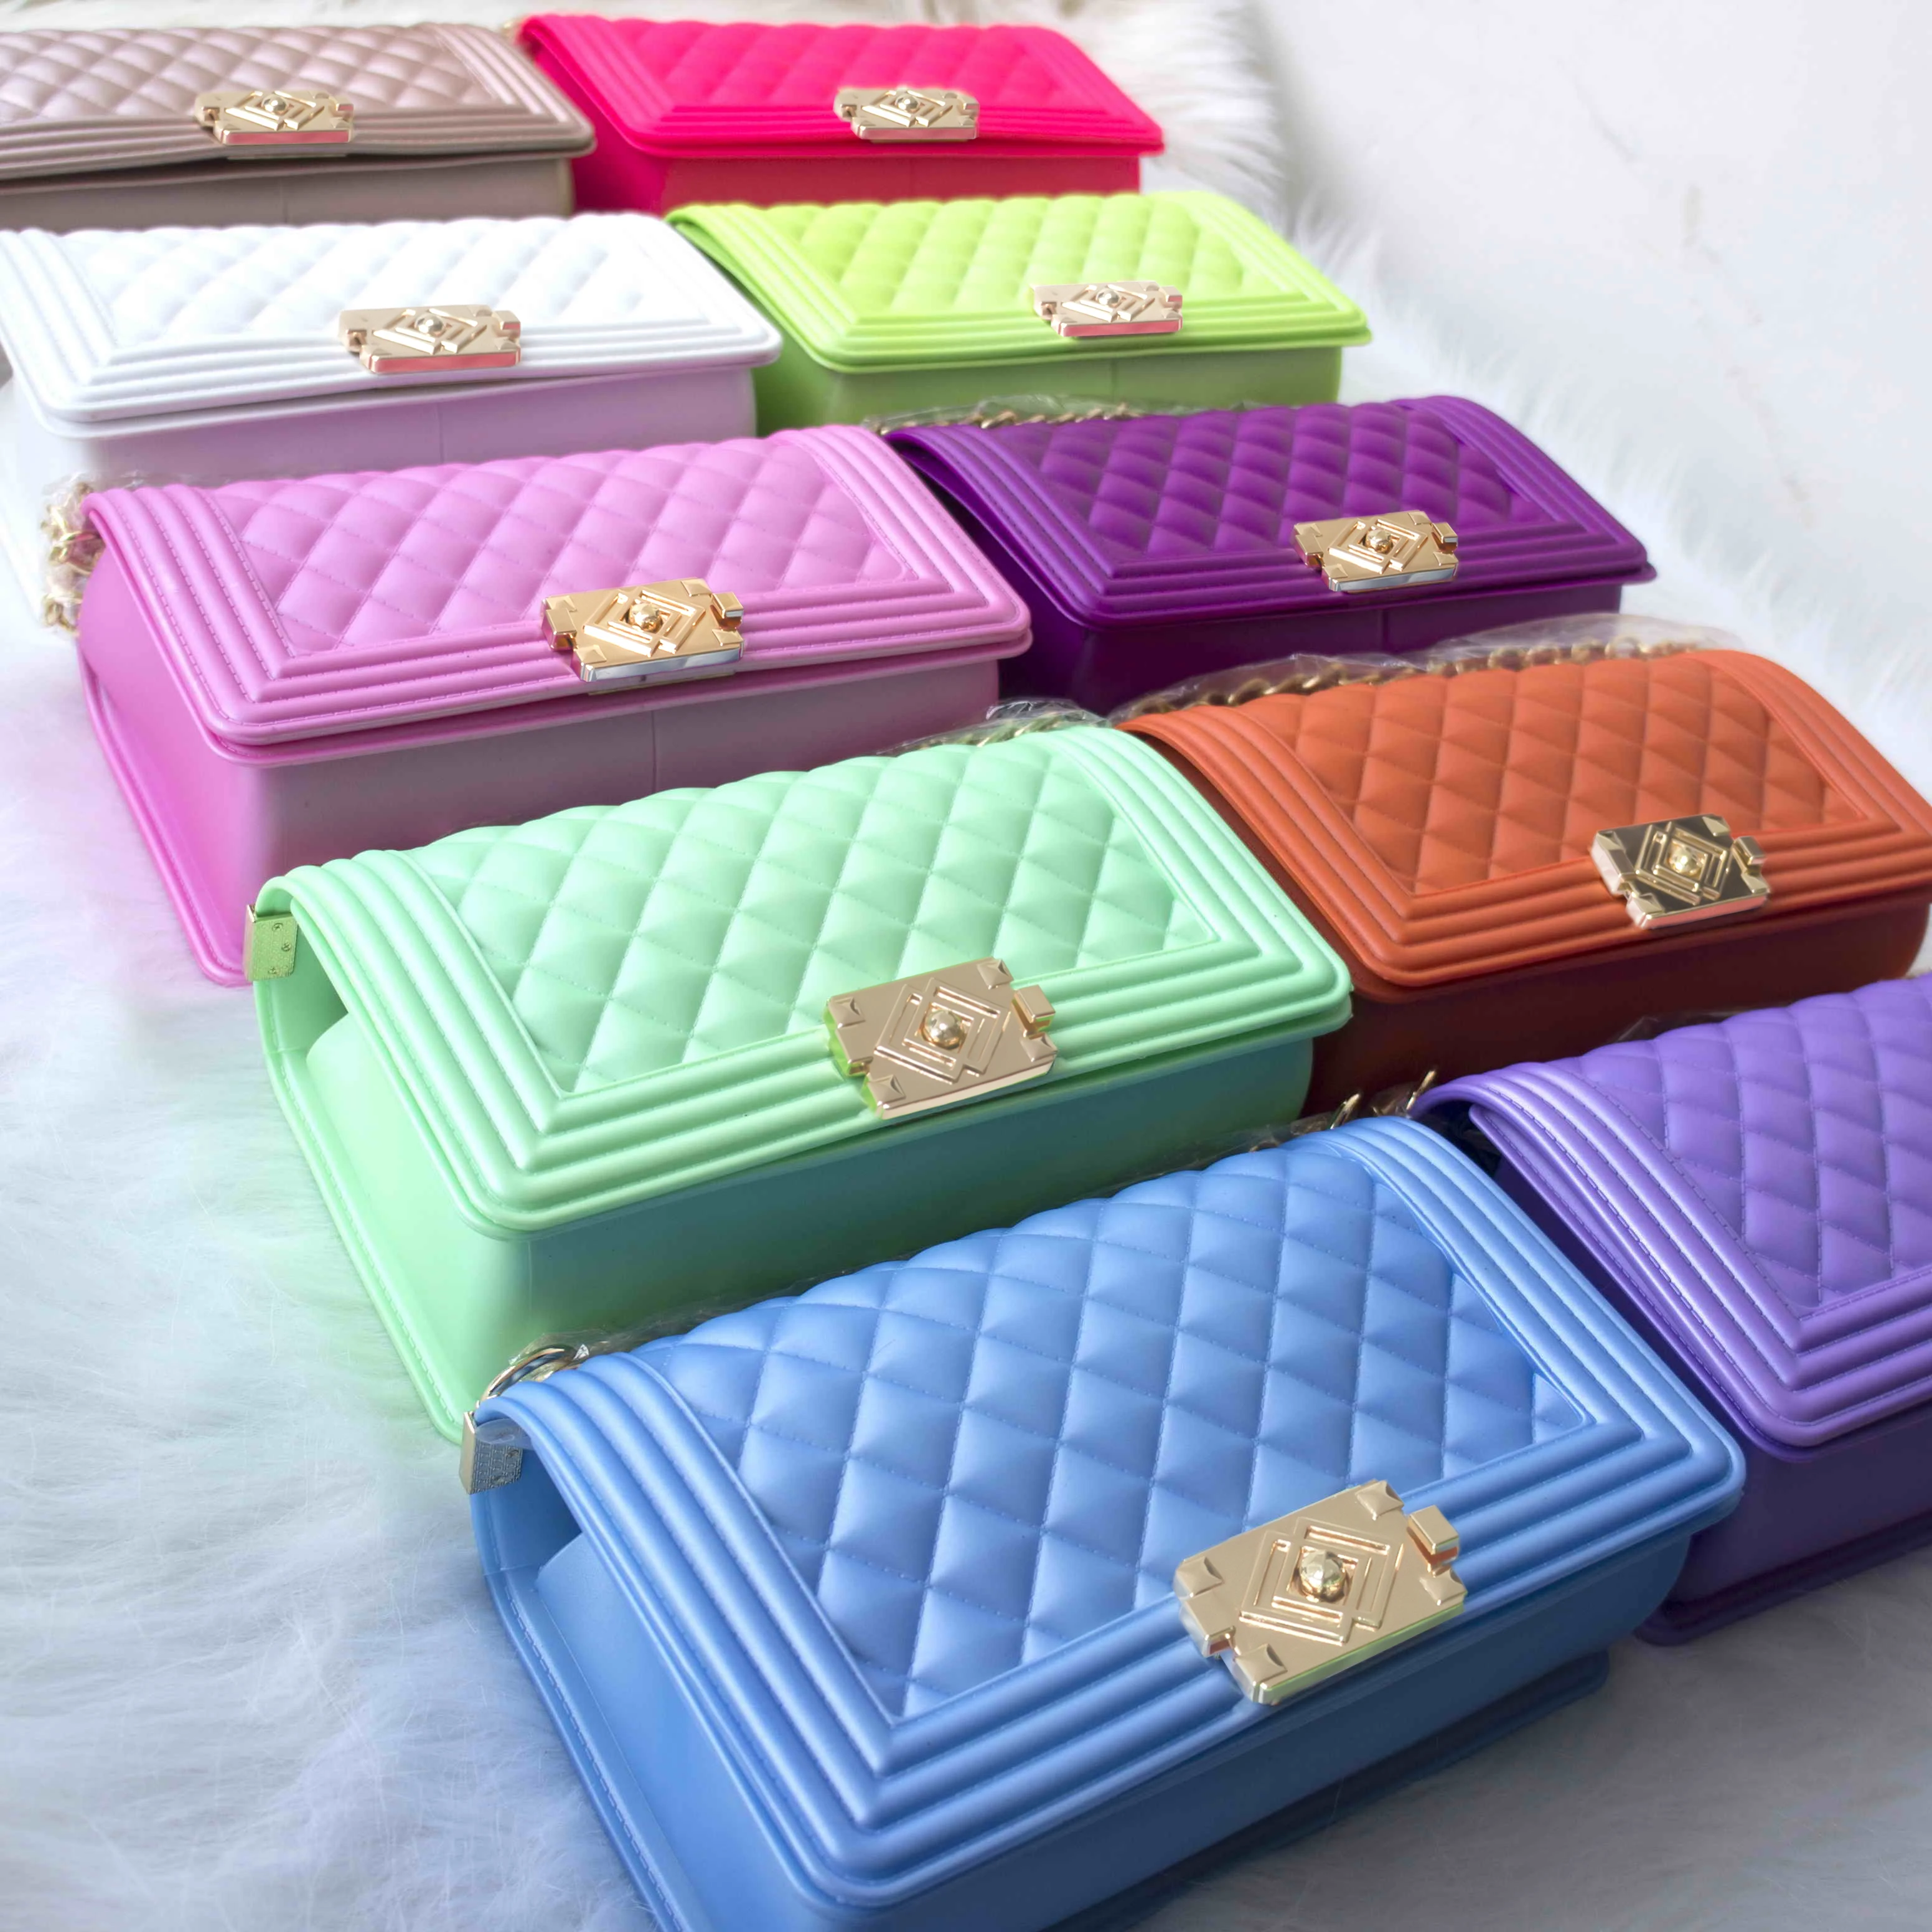 

2021 Hot selling lattice chain candy color jelly bag women purses handbags, Any color